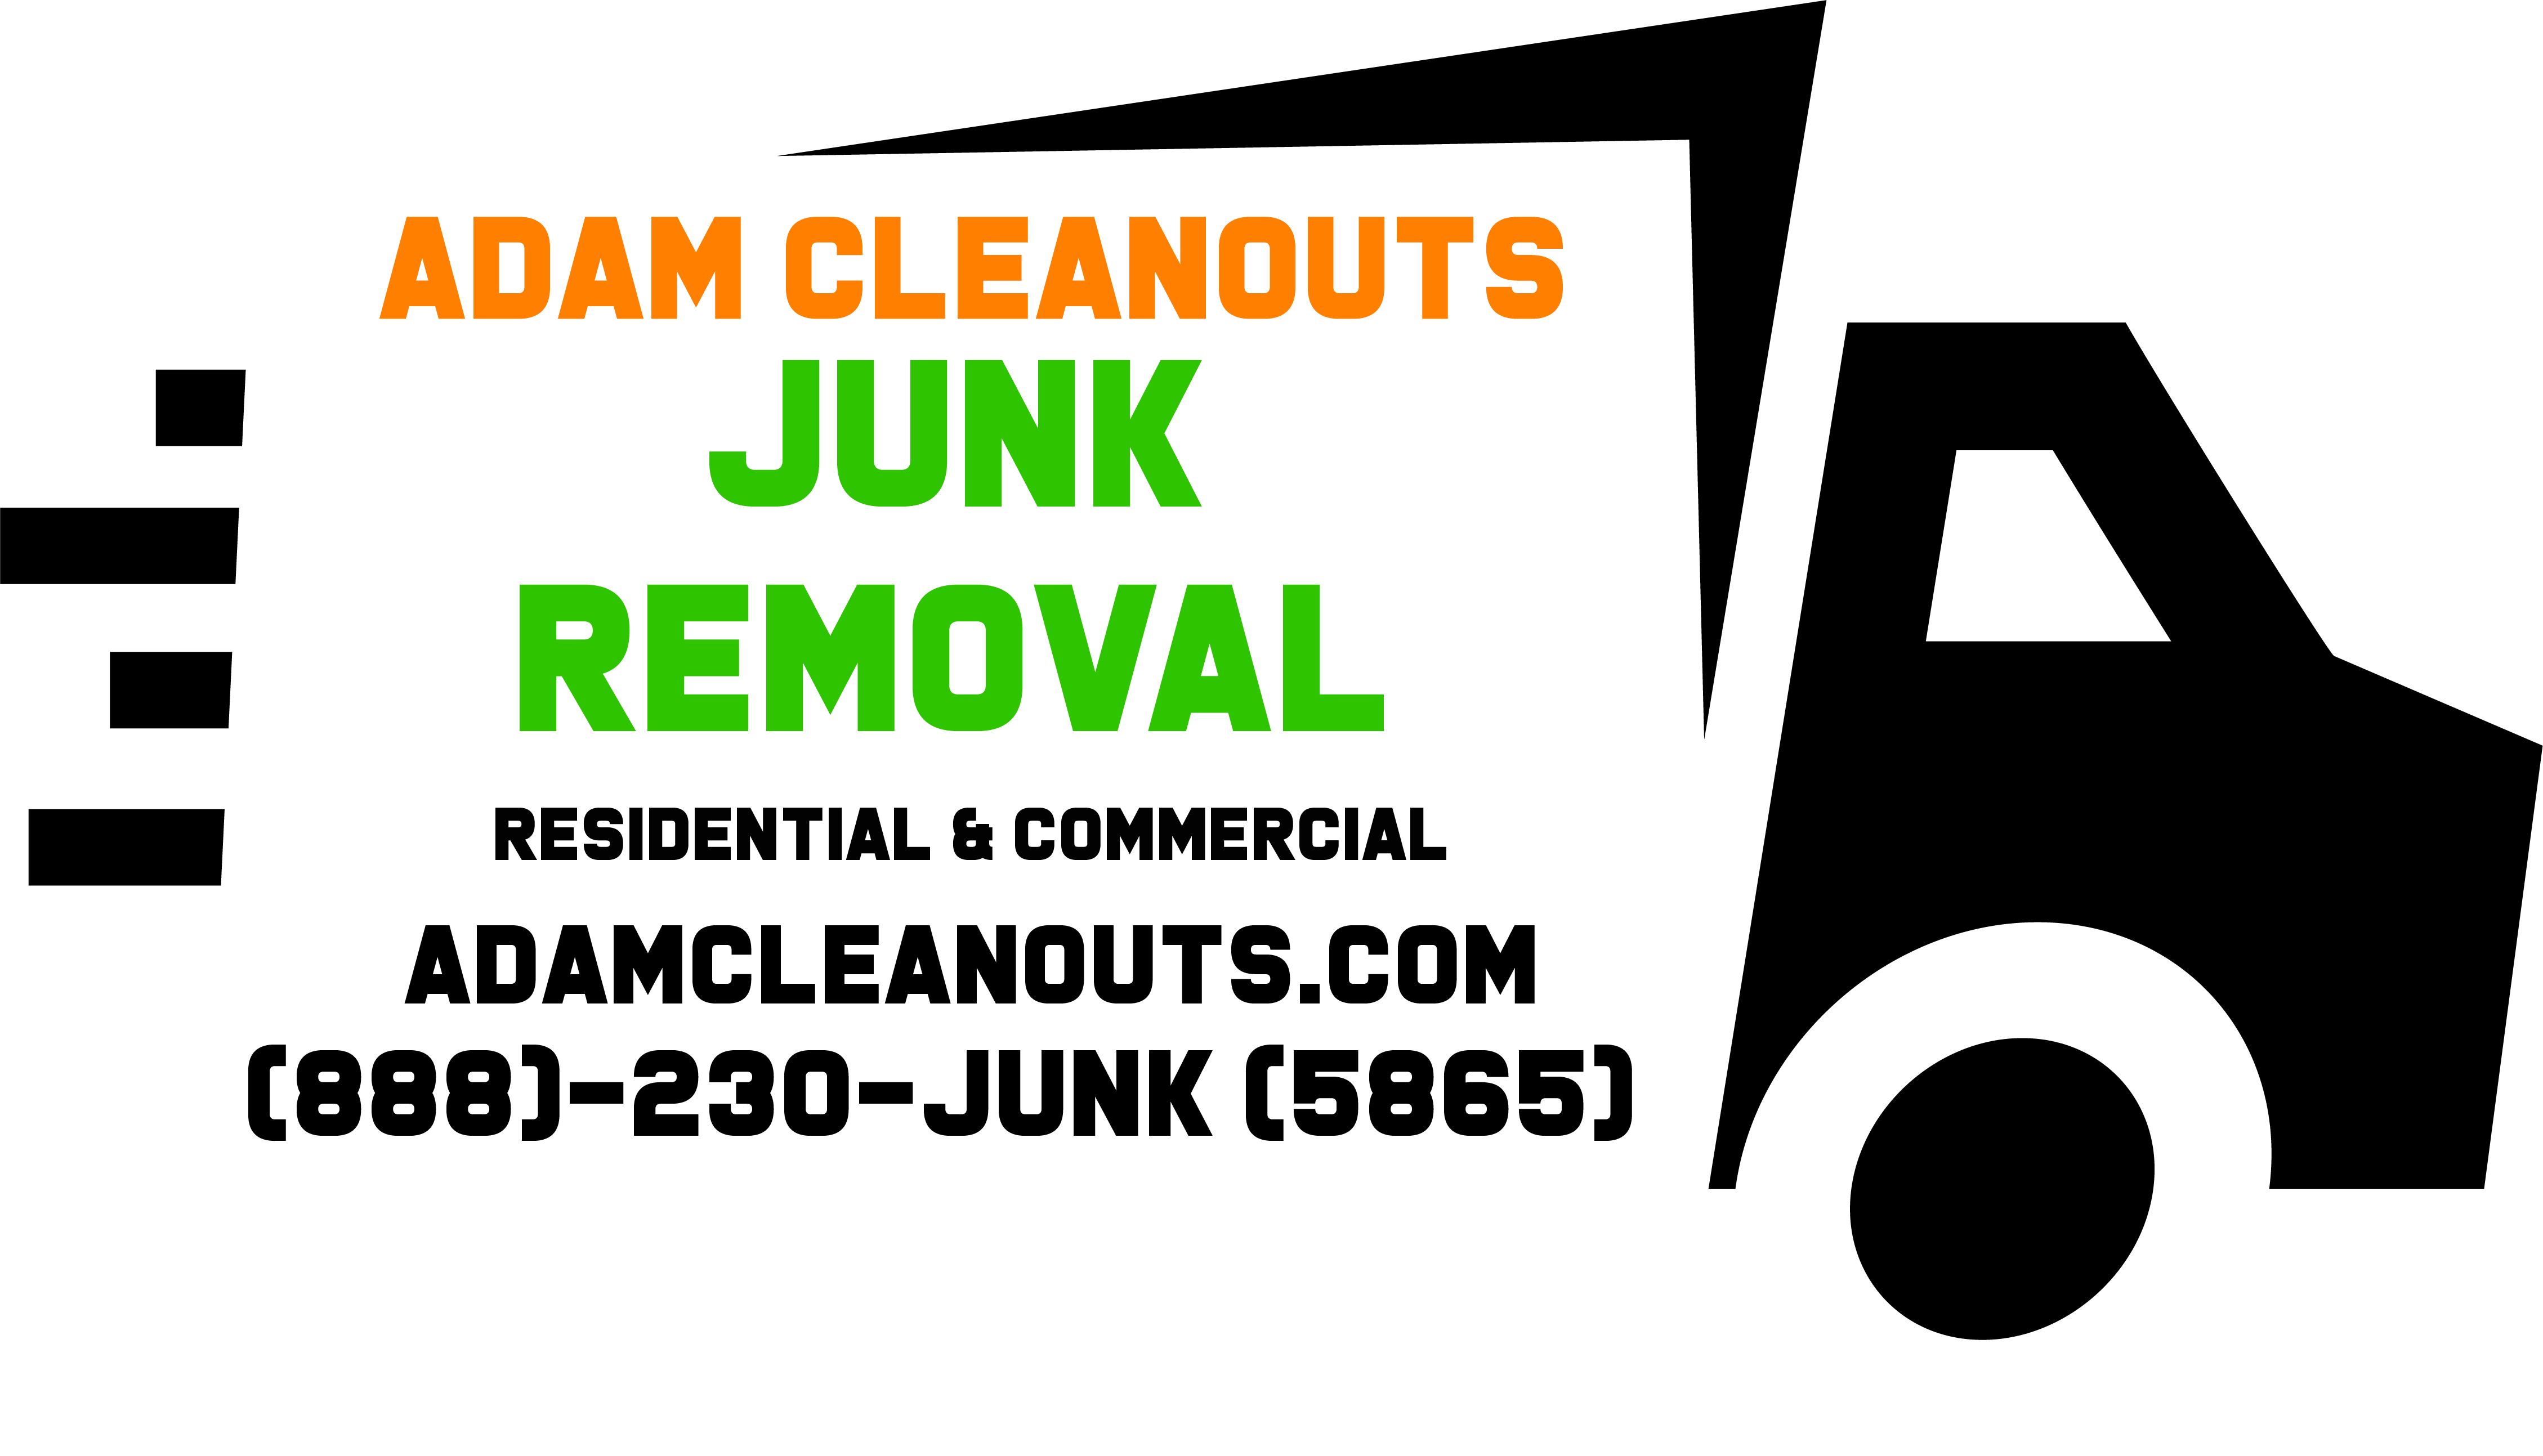 Adam Cleanouts and junk removal Black & Green Logo